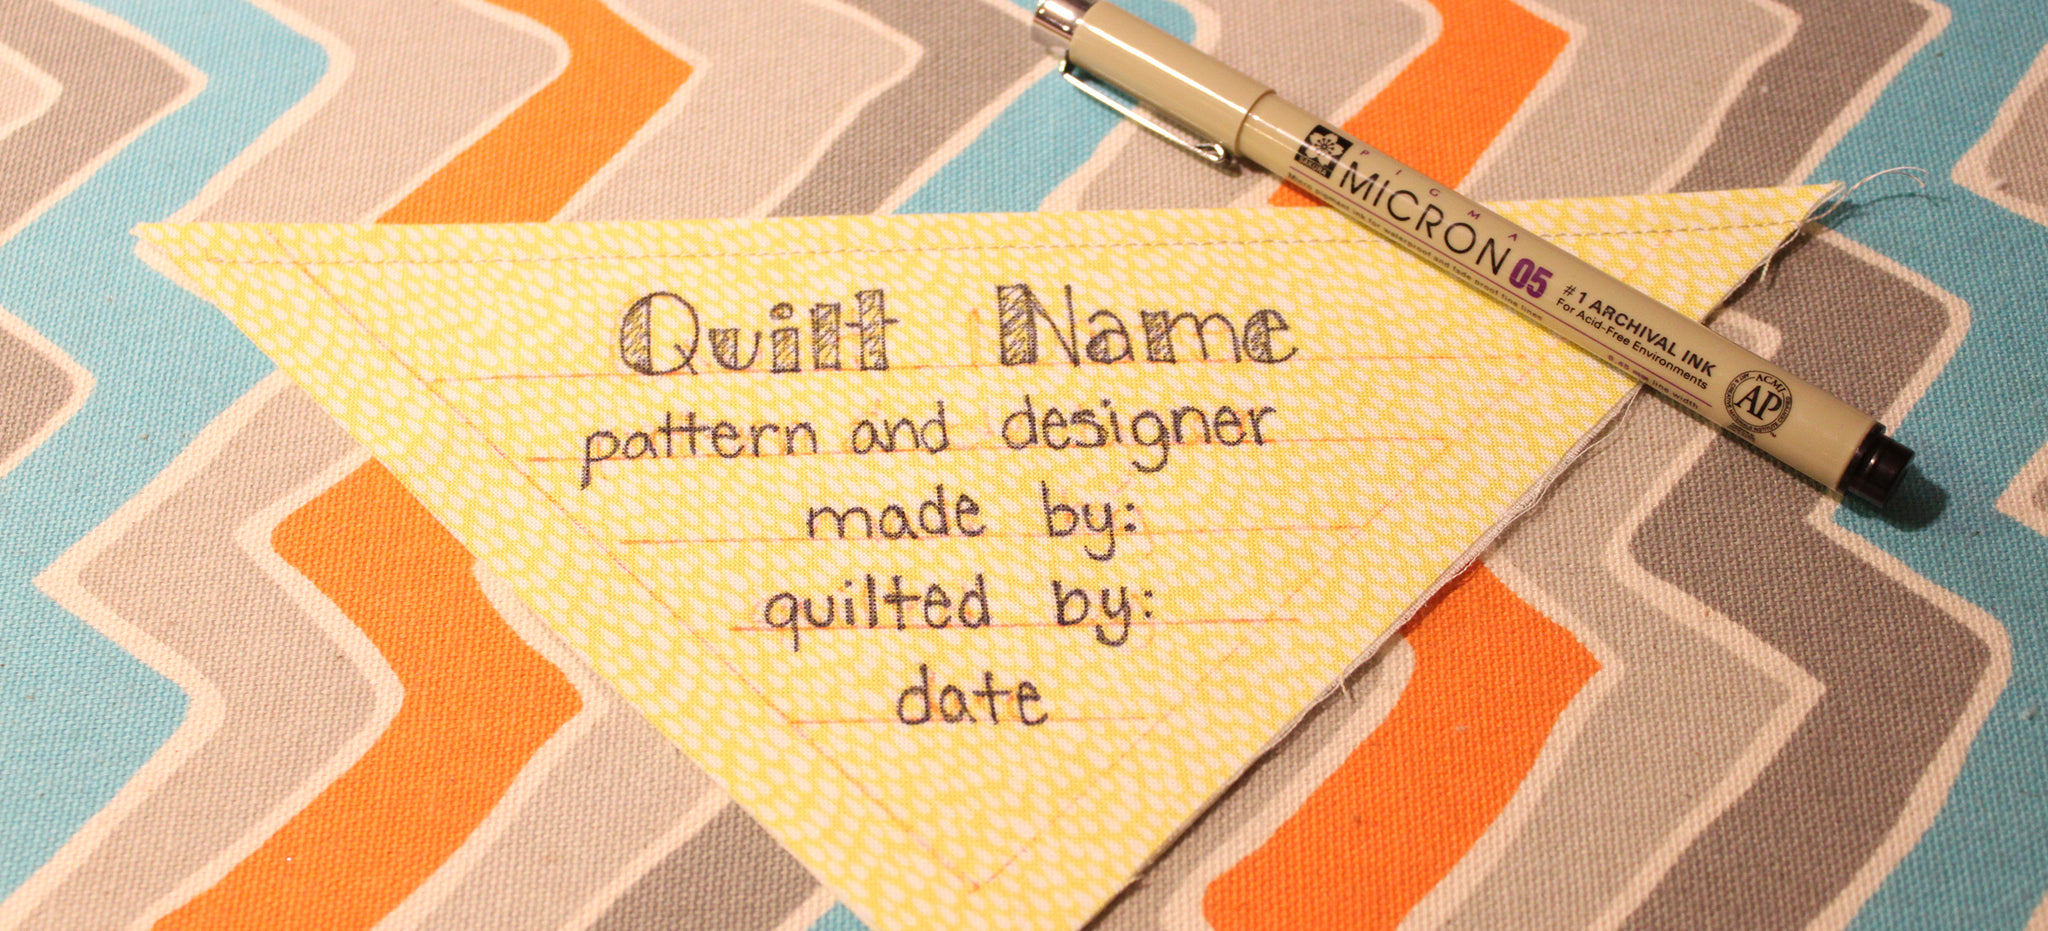 Sewology Sunday - Easy Quilt Label